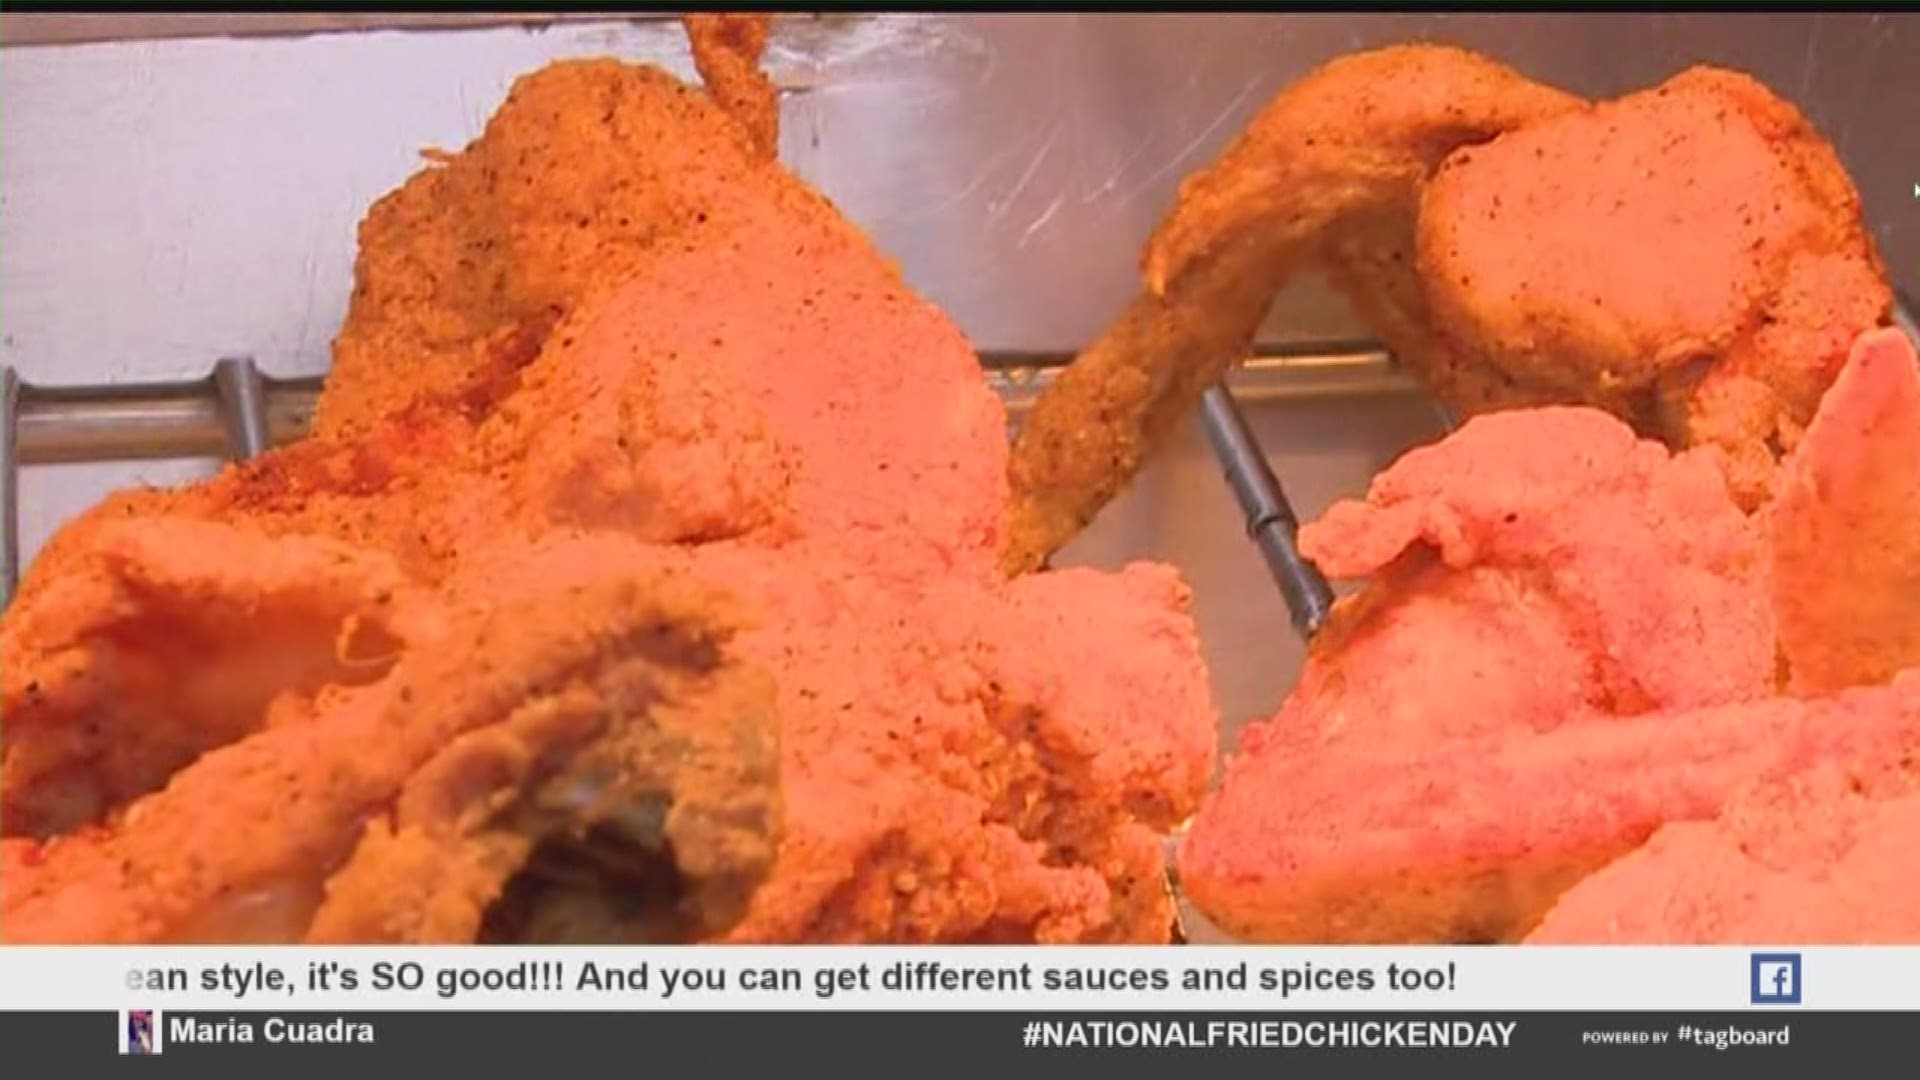 Sherry was live at Frenchy's Fried Chicken to celebrate National Fried Chicken Day and she sent over a little present to the anchors. For more info about Frenchy's, visit:  http://www.frenchyschicken.com/